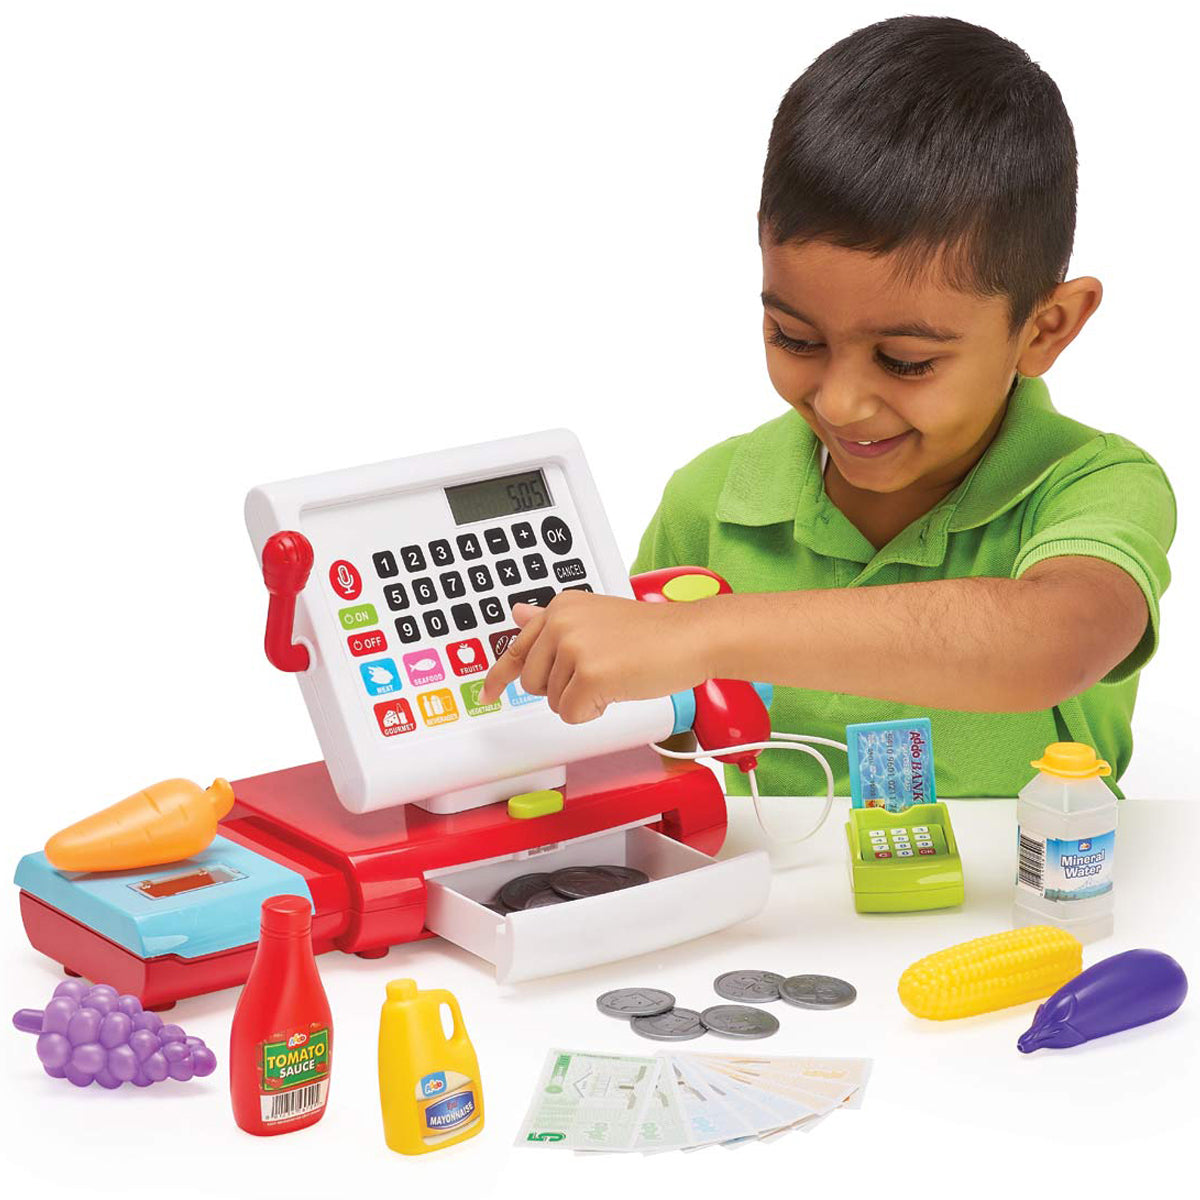 Busy Me Electronic Cash Register Playset